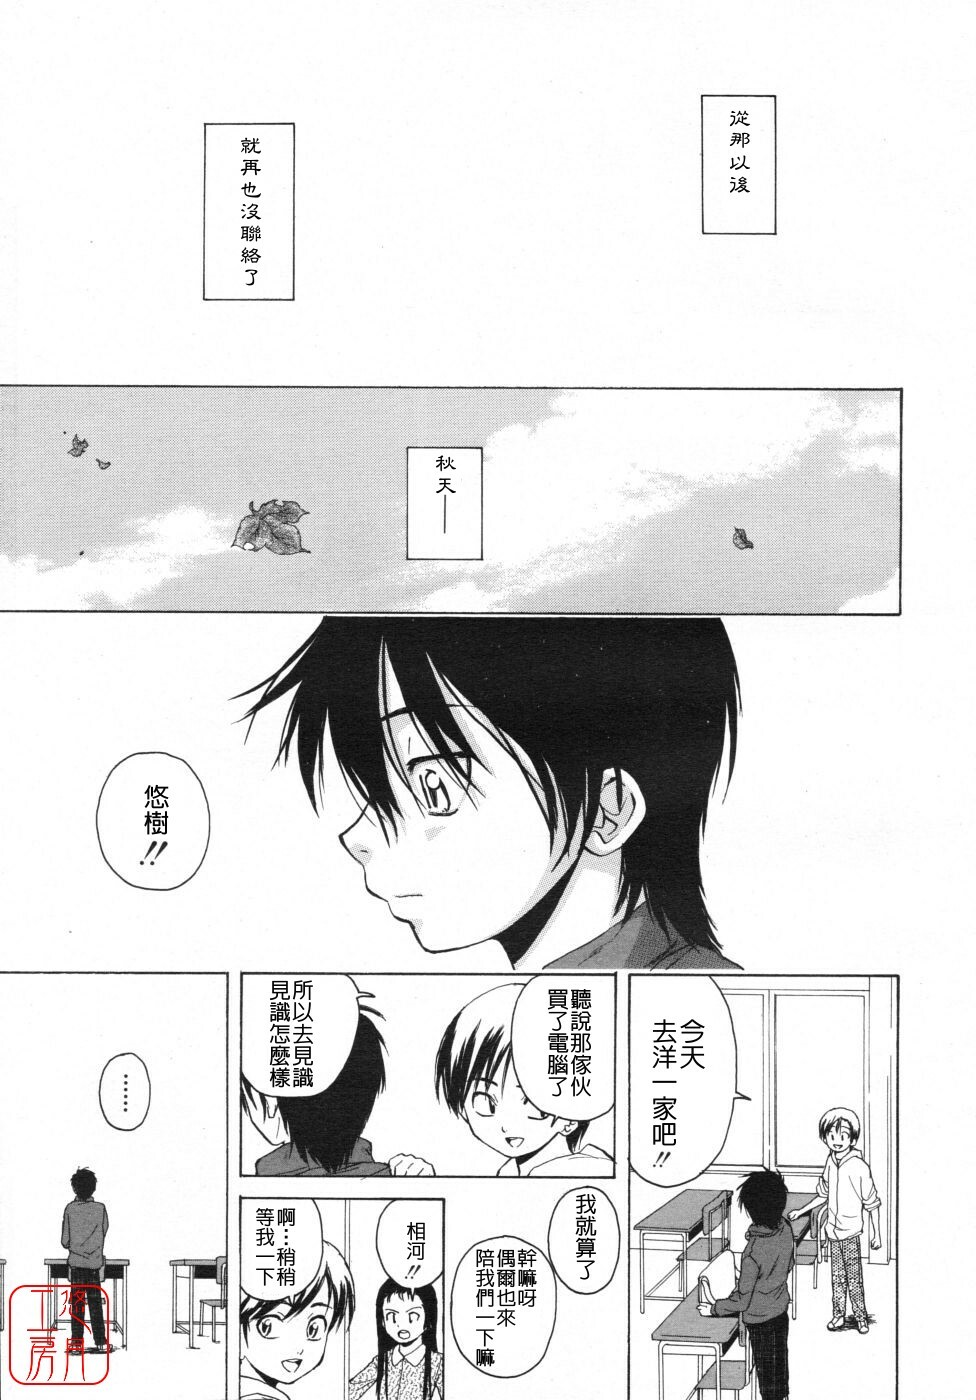 [Fuuga] Girl Friend 2 (Chinese) page 13 full